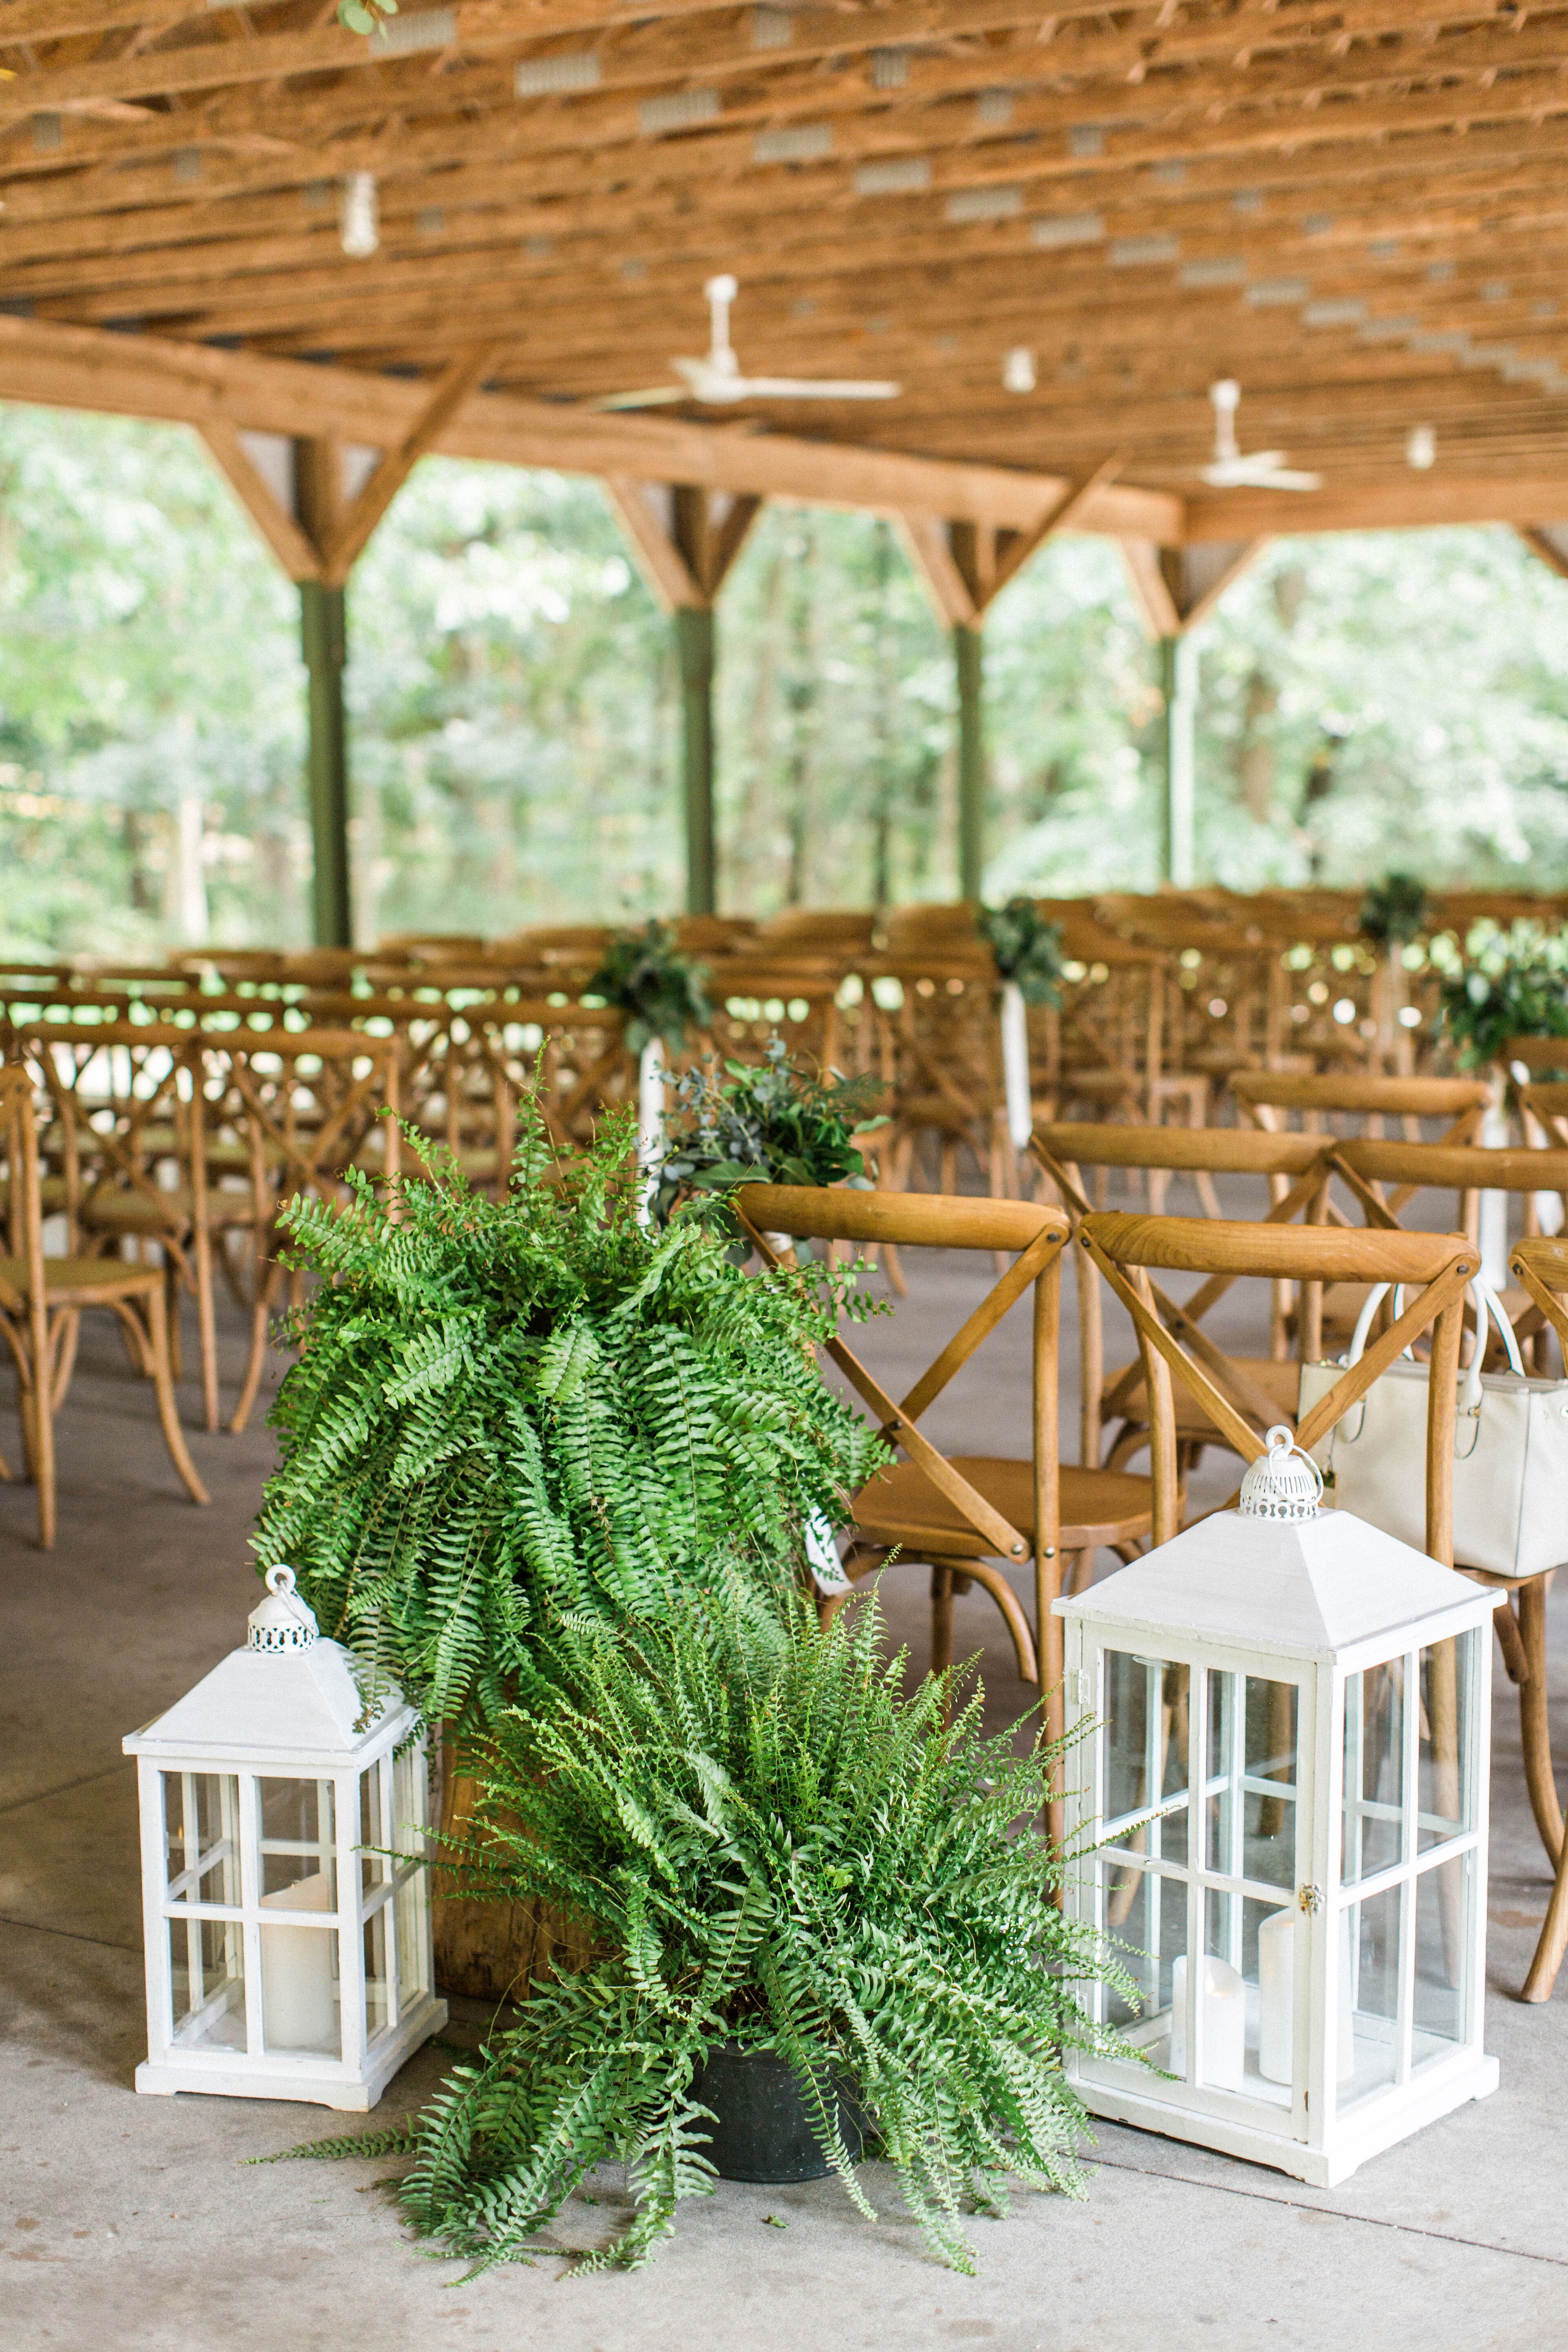 Fern Aisle Decorations at Rustic Outdoor Campground Ceremony